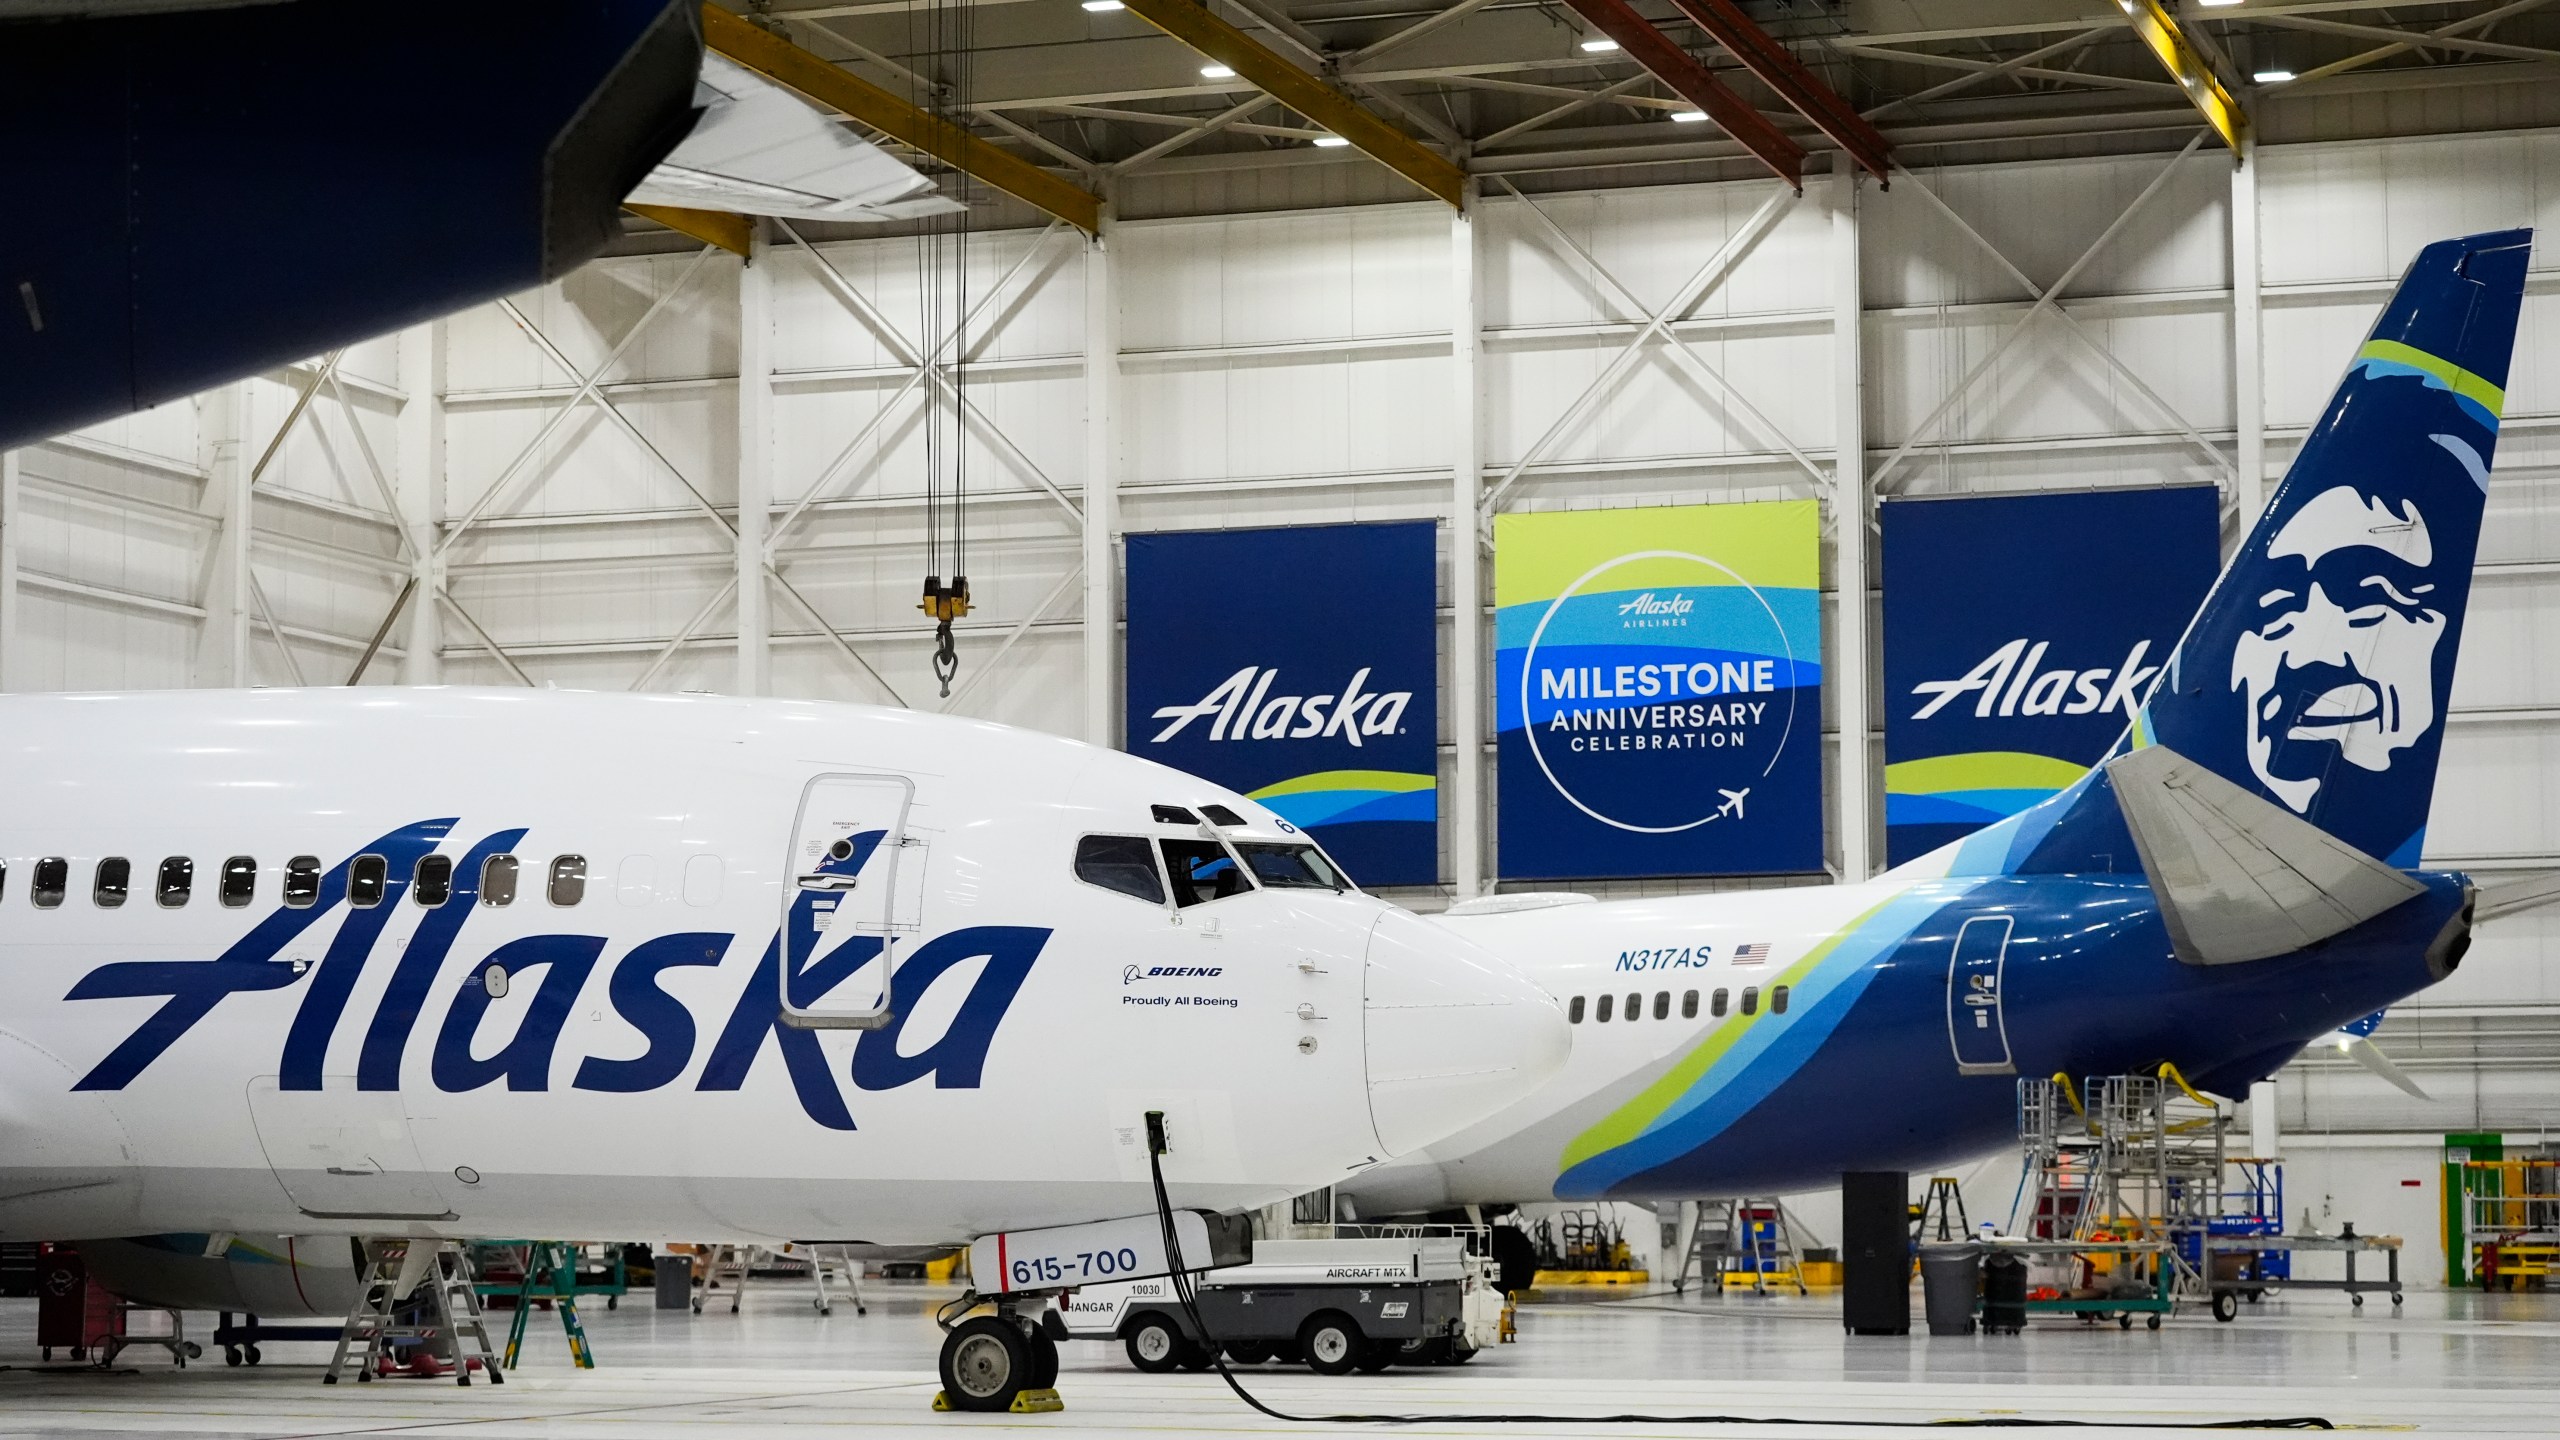 Alaska Airlines aircraft sit in the airline's hangar at Seattle-Tacoma International Airport Wednesday, Jan. 10, 2024, in SeaTac, Wash. Boeing has acknowledged in a letter to Congress that it cannot find records for work done on a door panel that blew out on an Alaska Airlines flight over Oregon two months ago. Ziad Ojakli, Boeing executive vice president and chief government lobbyist, wrote to Sen. Maria Cantwell on Friday, March 8 saying, “We have looked extensively and have not found any such documentation.” (AP Photo/Lindsey Wasson)